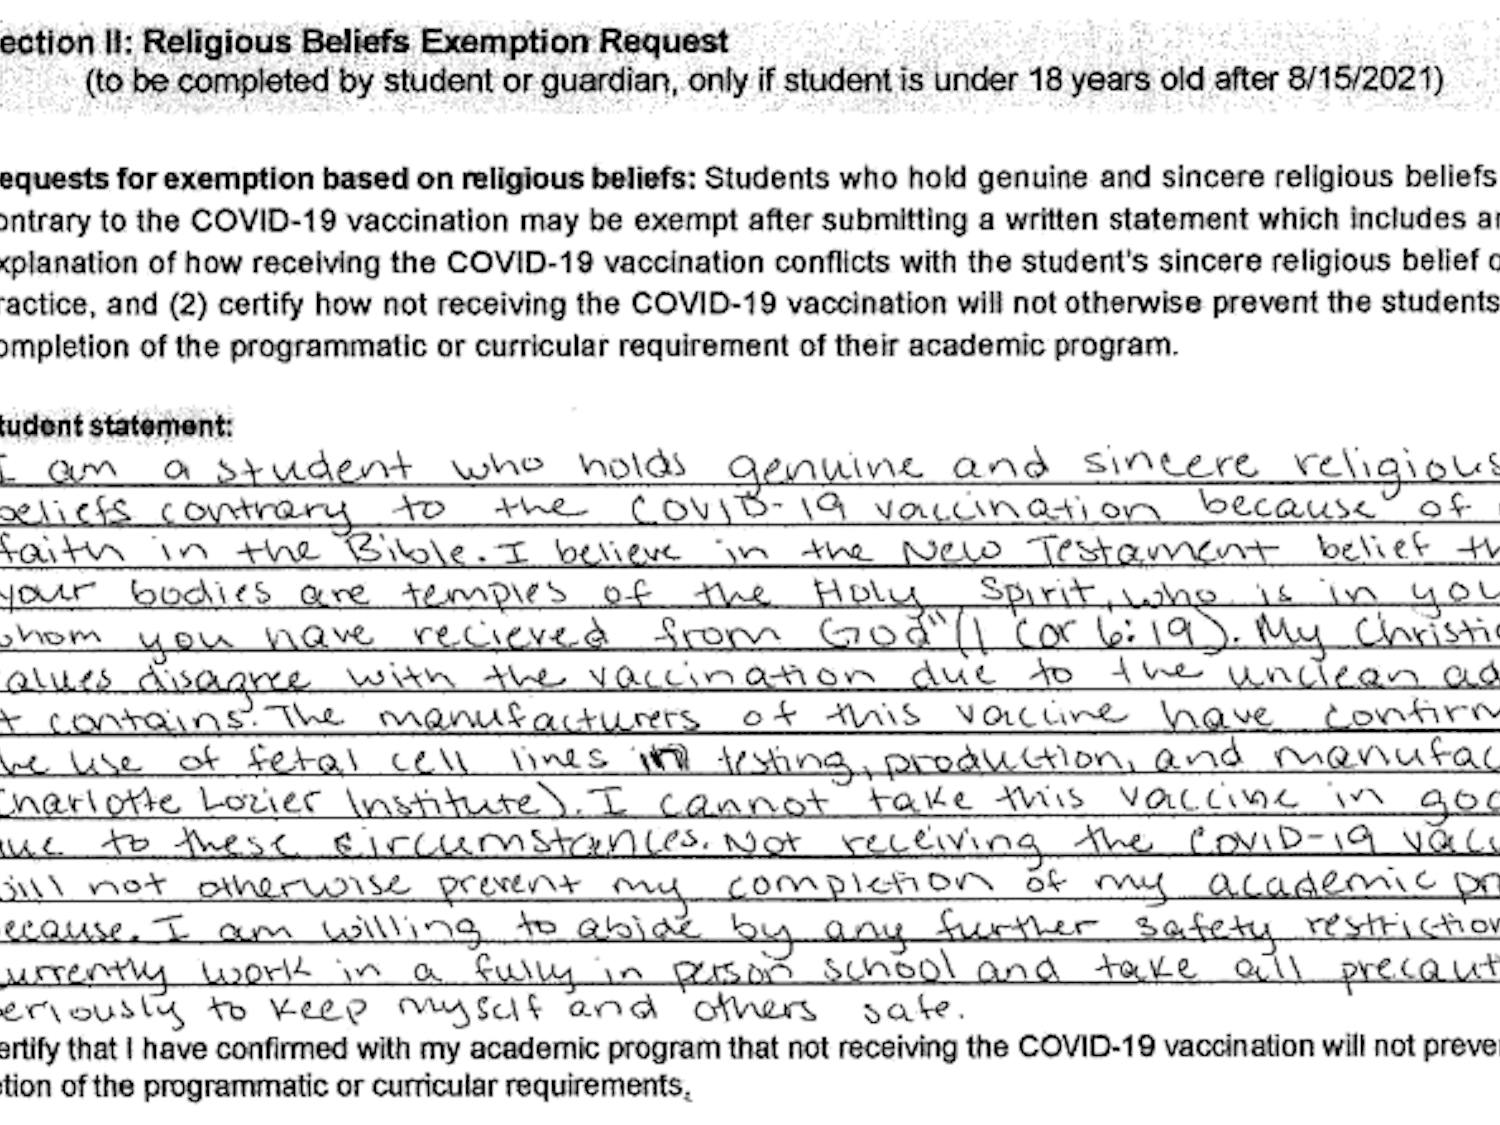 A student cites Corinthians 6:19 as part of the basis for his request to not receive the mandatory COVID-19 vaccine.